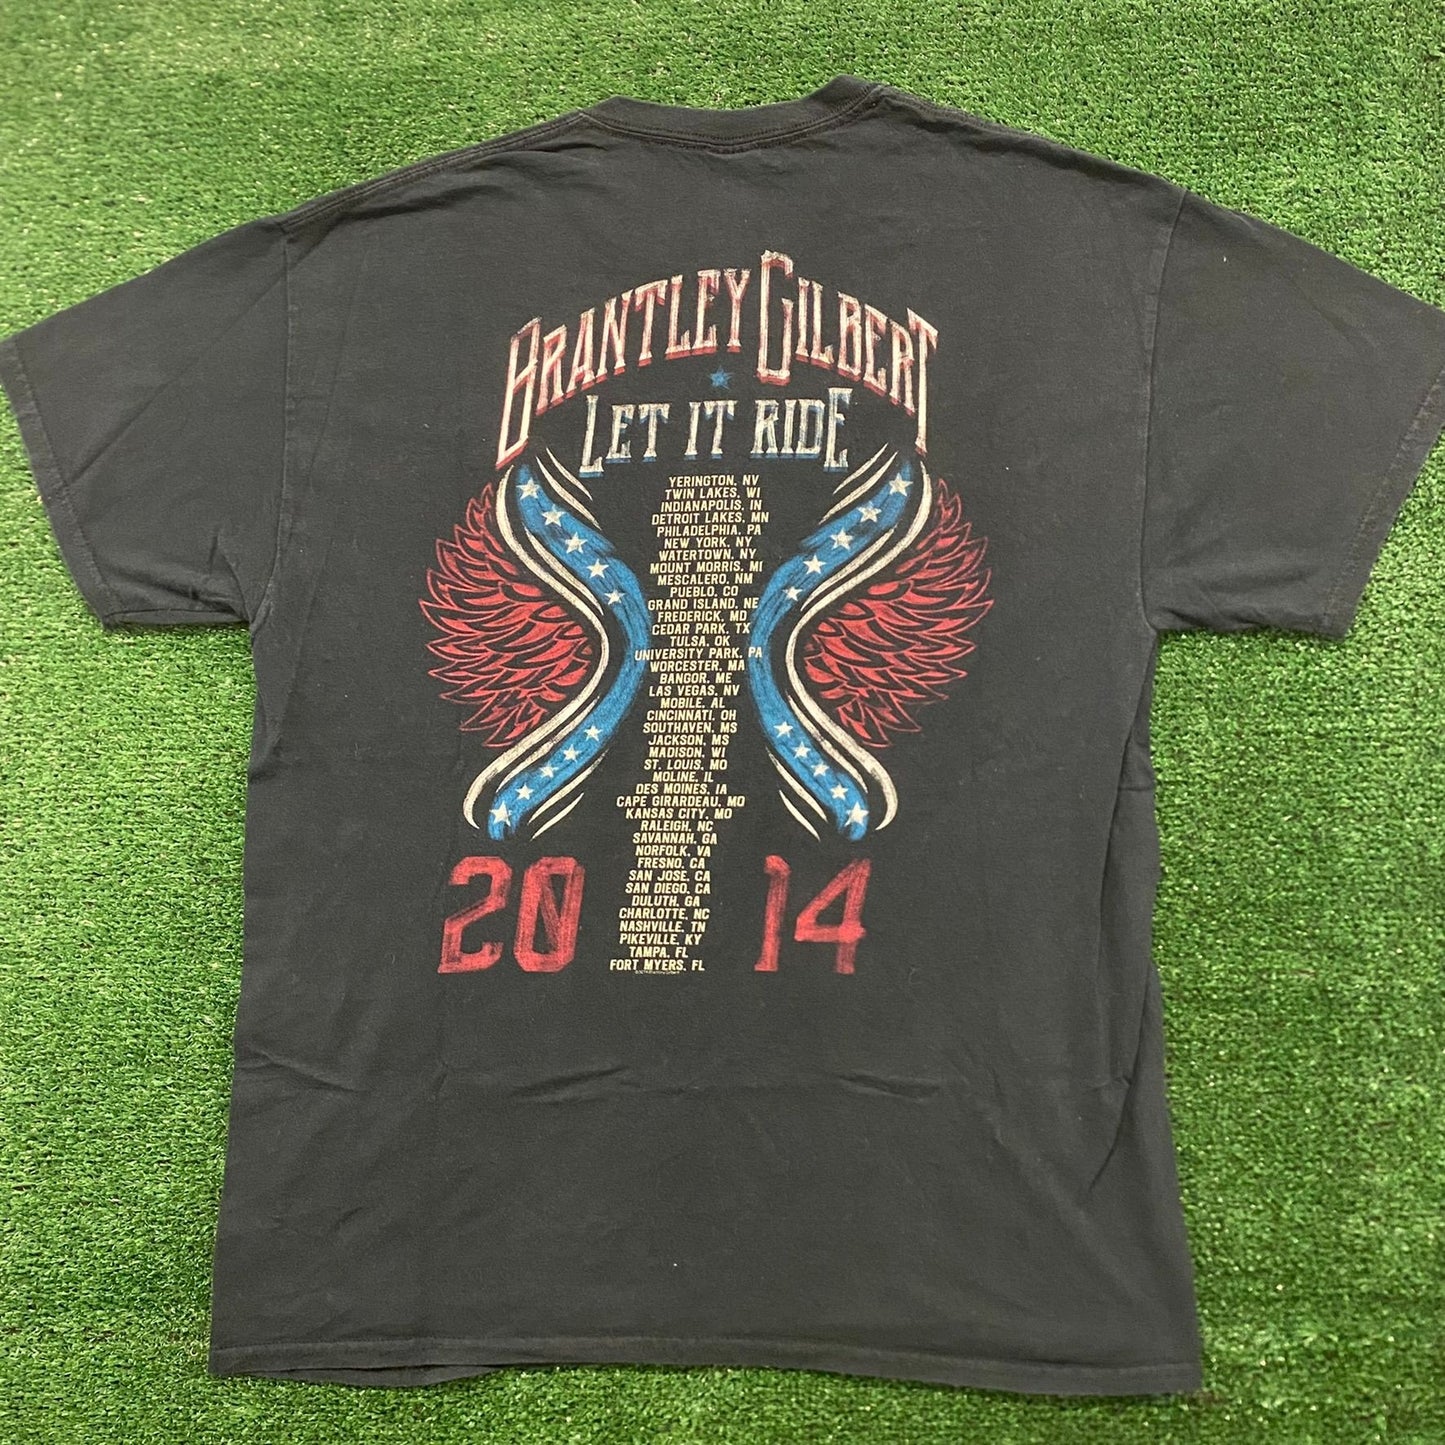 Brantley Gilbert Vintage Western Country Music Band T-Shirt